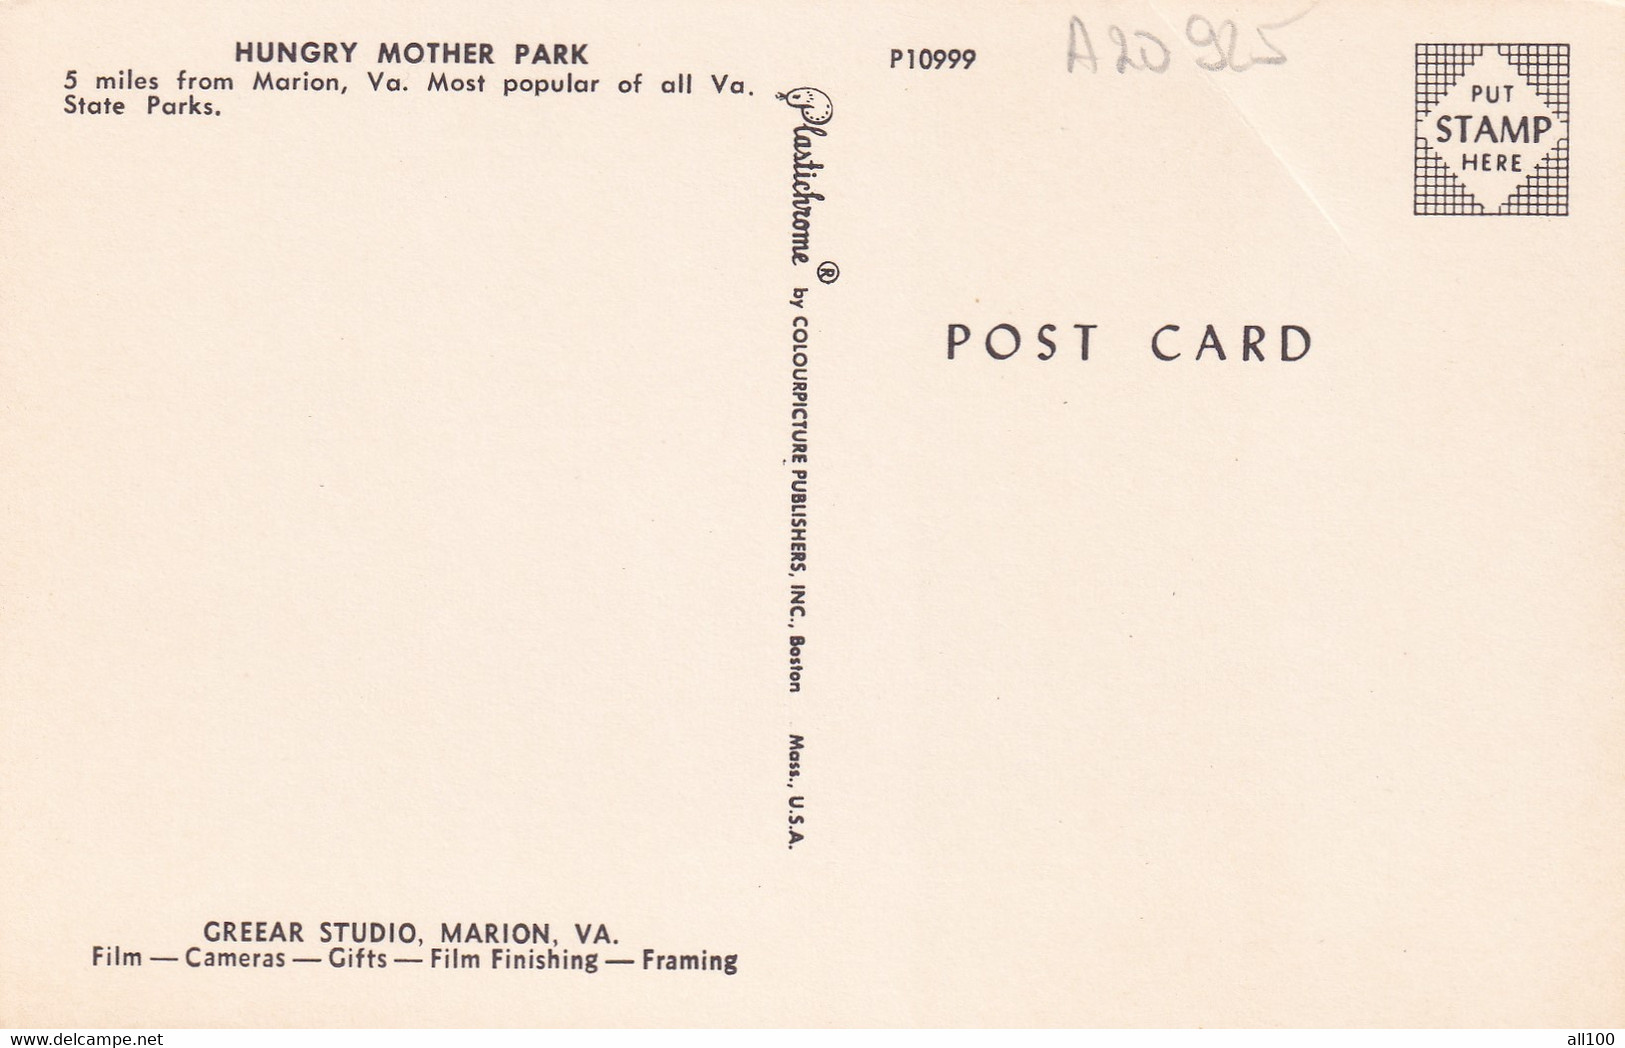 A20925 - HUNGRY MOTHER PARK MARION VIRGINIA USA UNITED STATES OF AMERICA POST CARD UNUSED SHAWNEE INDIANS NEW RIVER - USA Nationale Parken